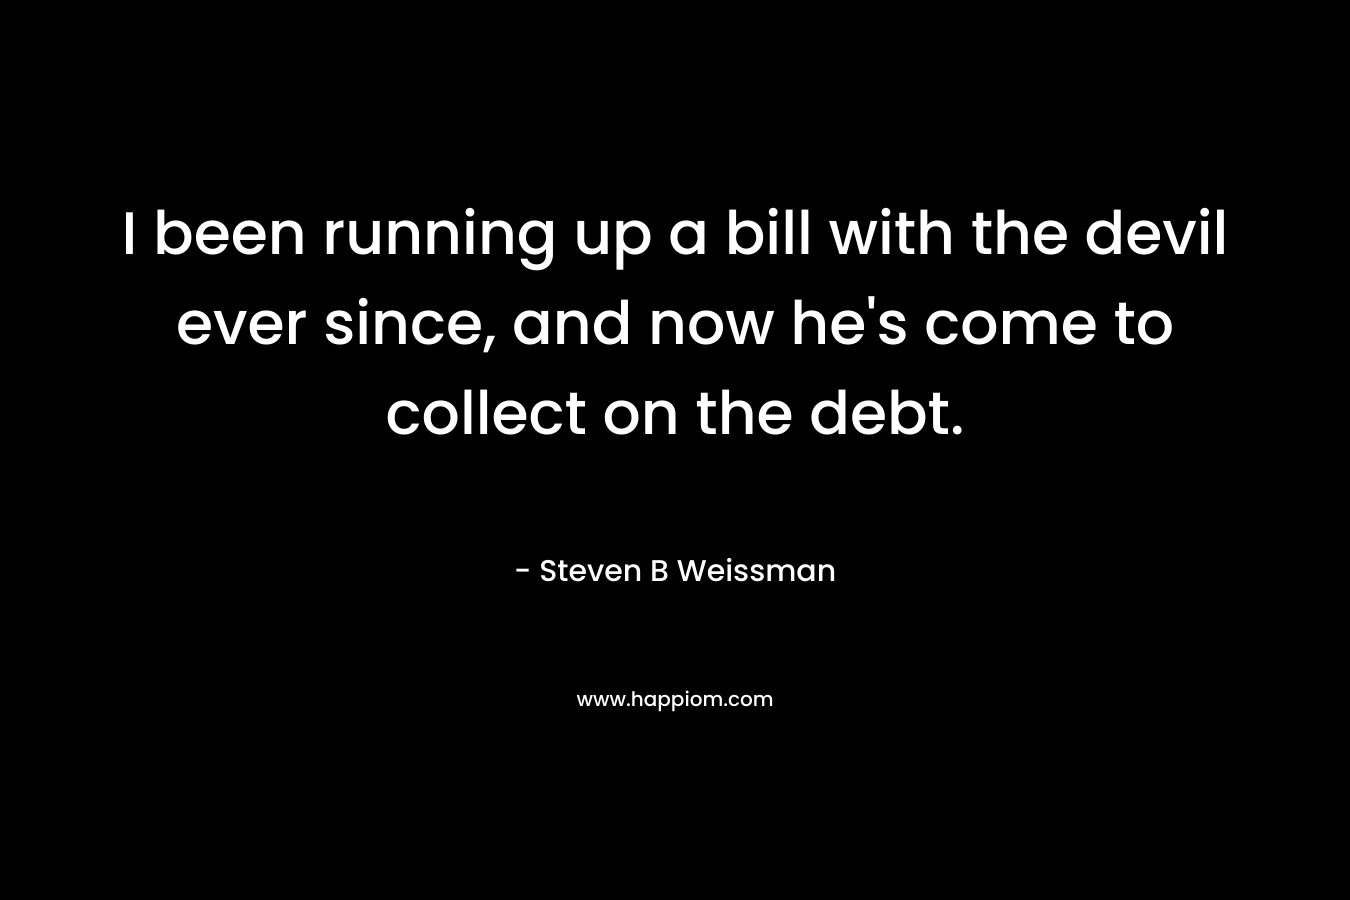 I been running up a bill with the devil ever since, and now he’s come to collect on the debt. – Steven B Weissman